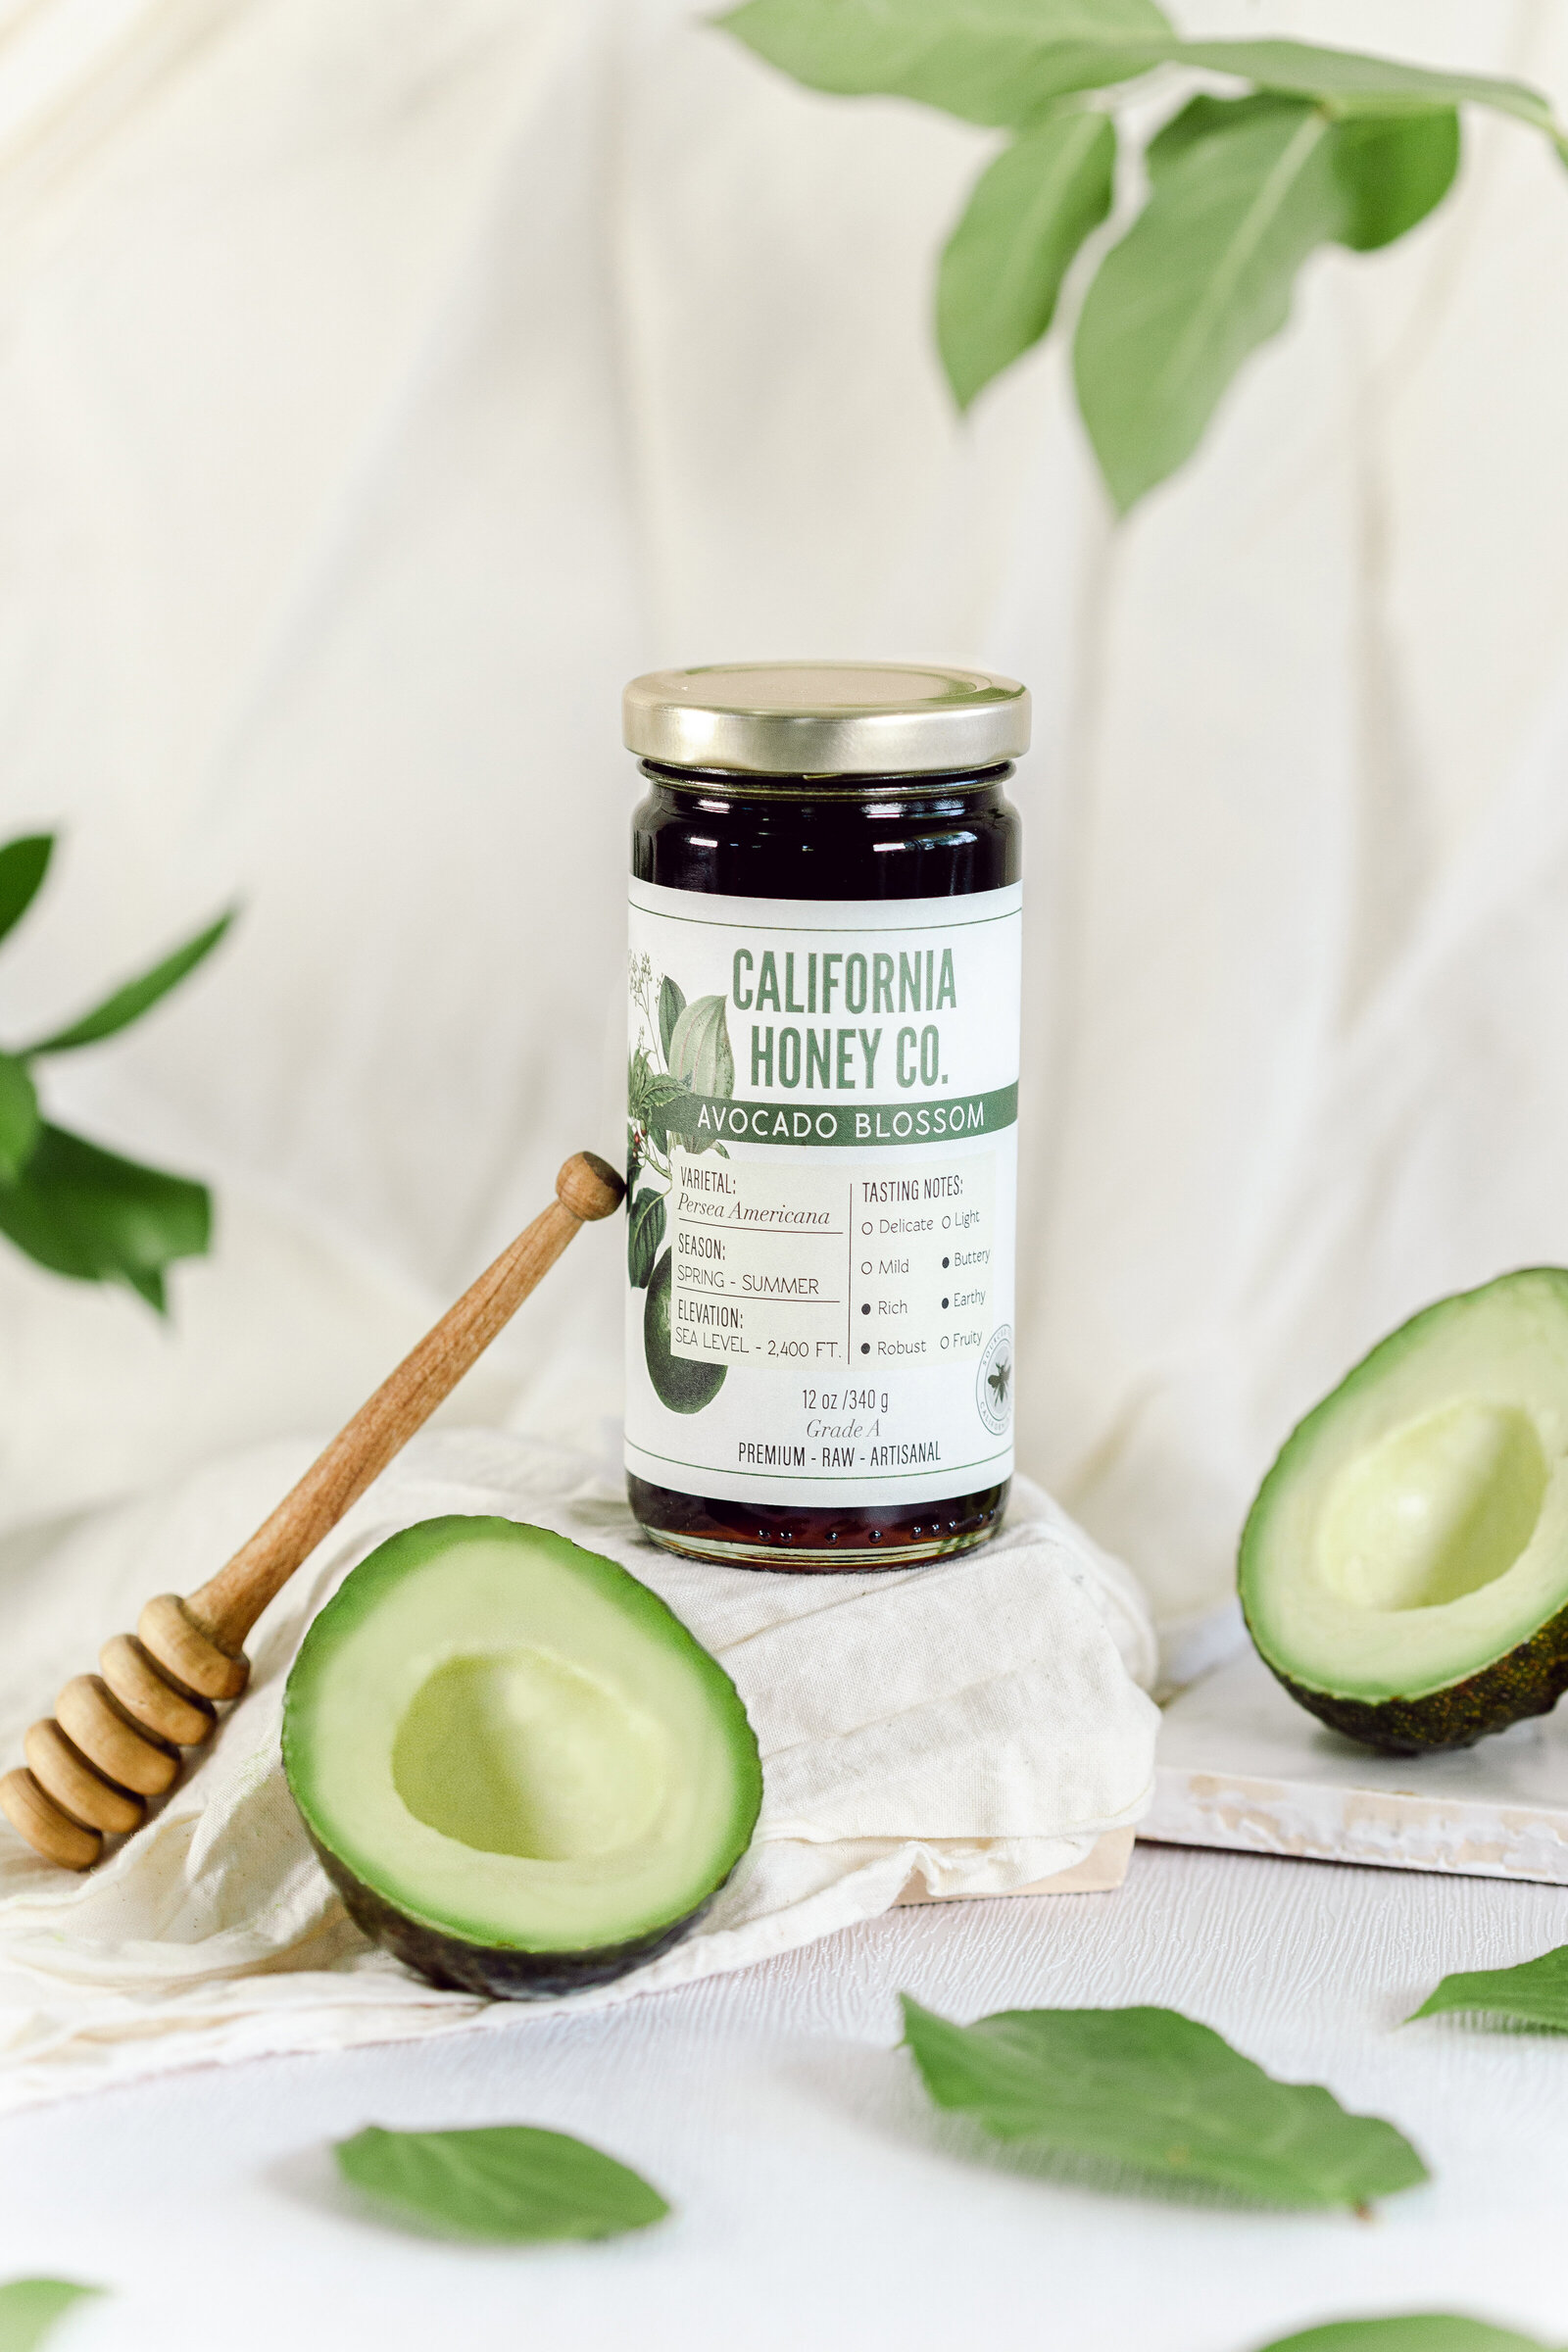 California Honey Co. styled food product photography with avocados by branding food product photographer Chelsea Loren